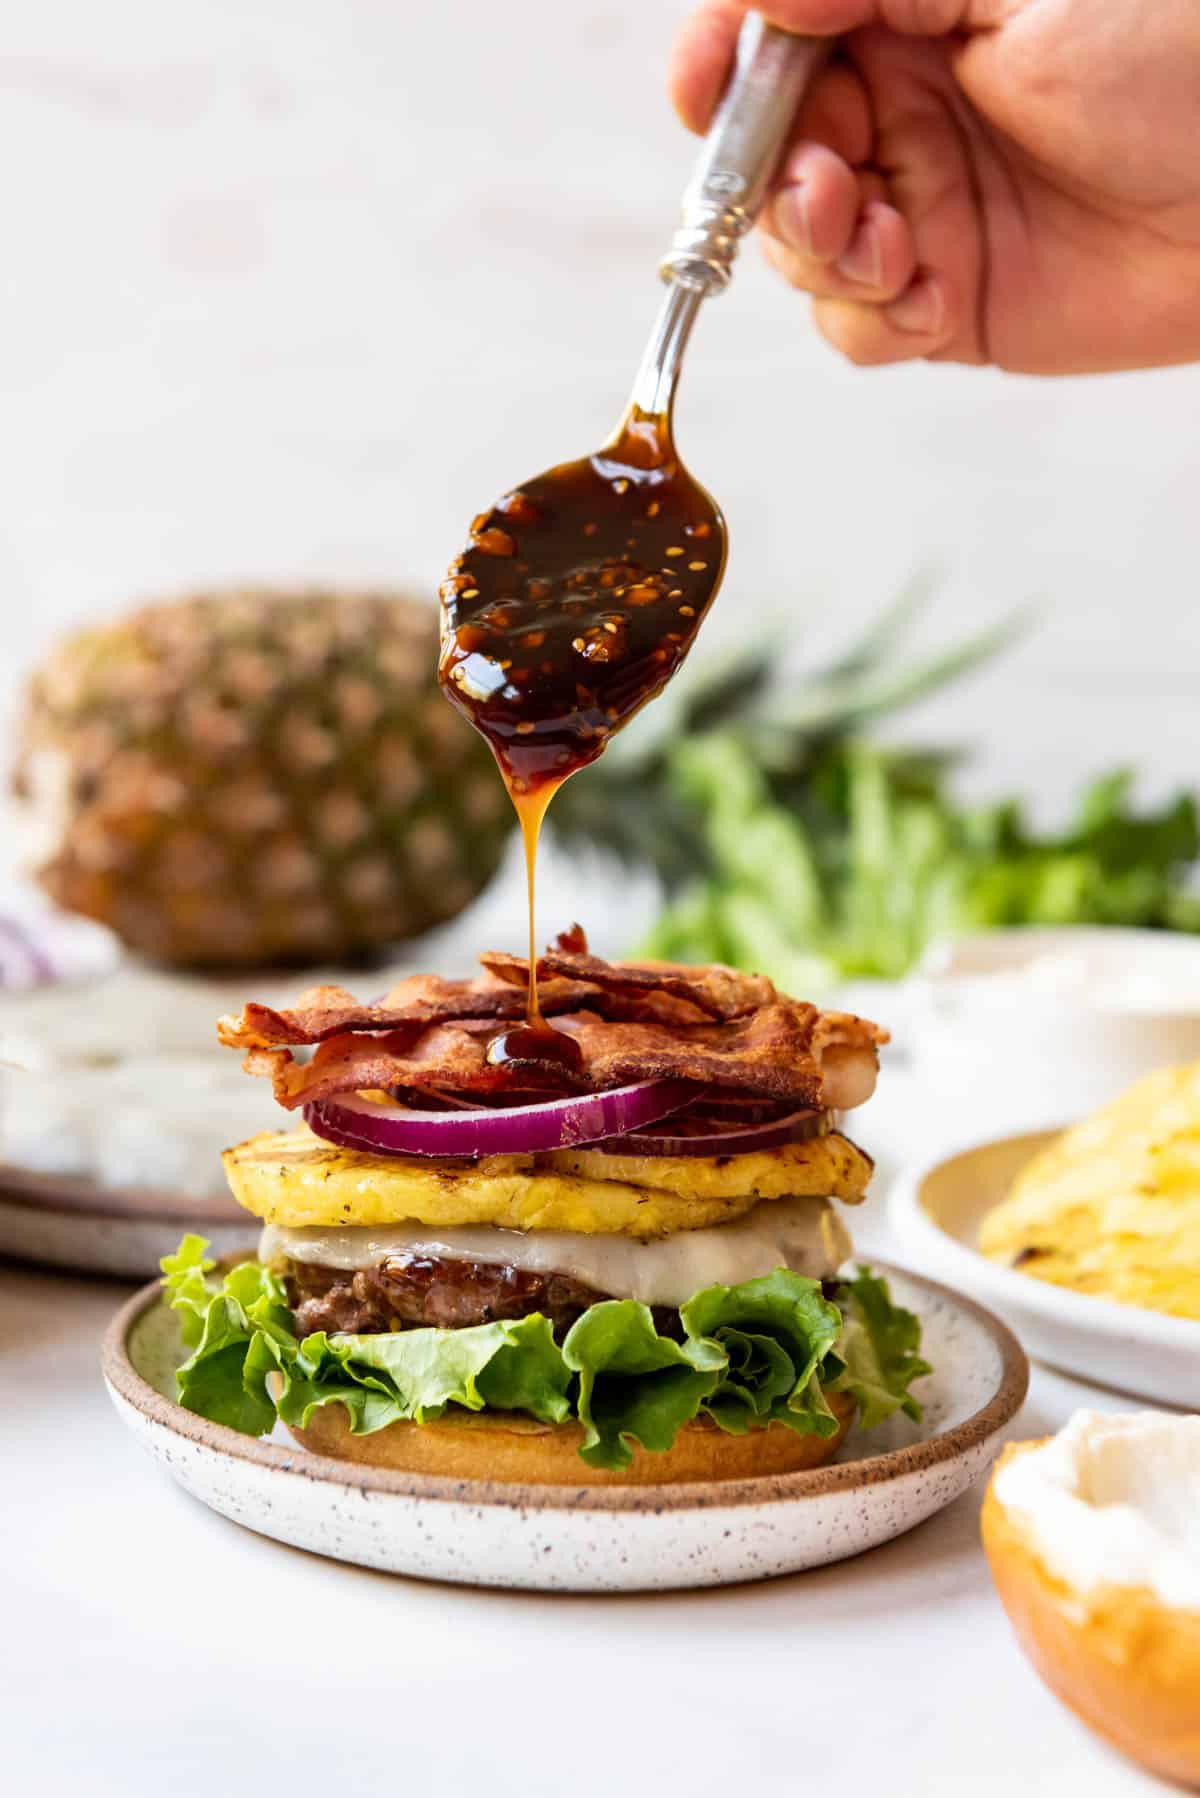 Drizzling teriyaki sauce over burgers topped with grilled pineapple, lettuce, red onions, bacon, and cheese.